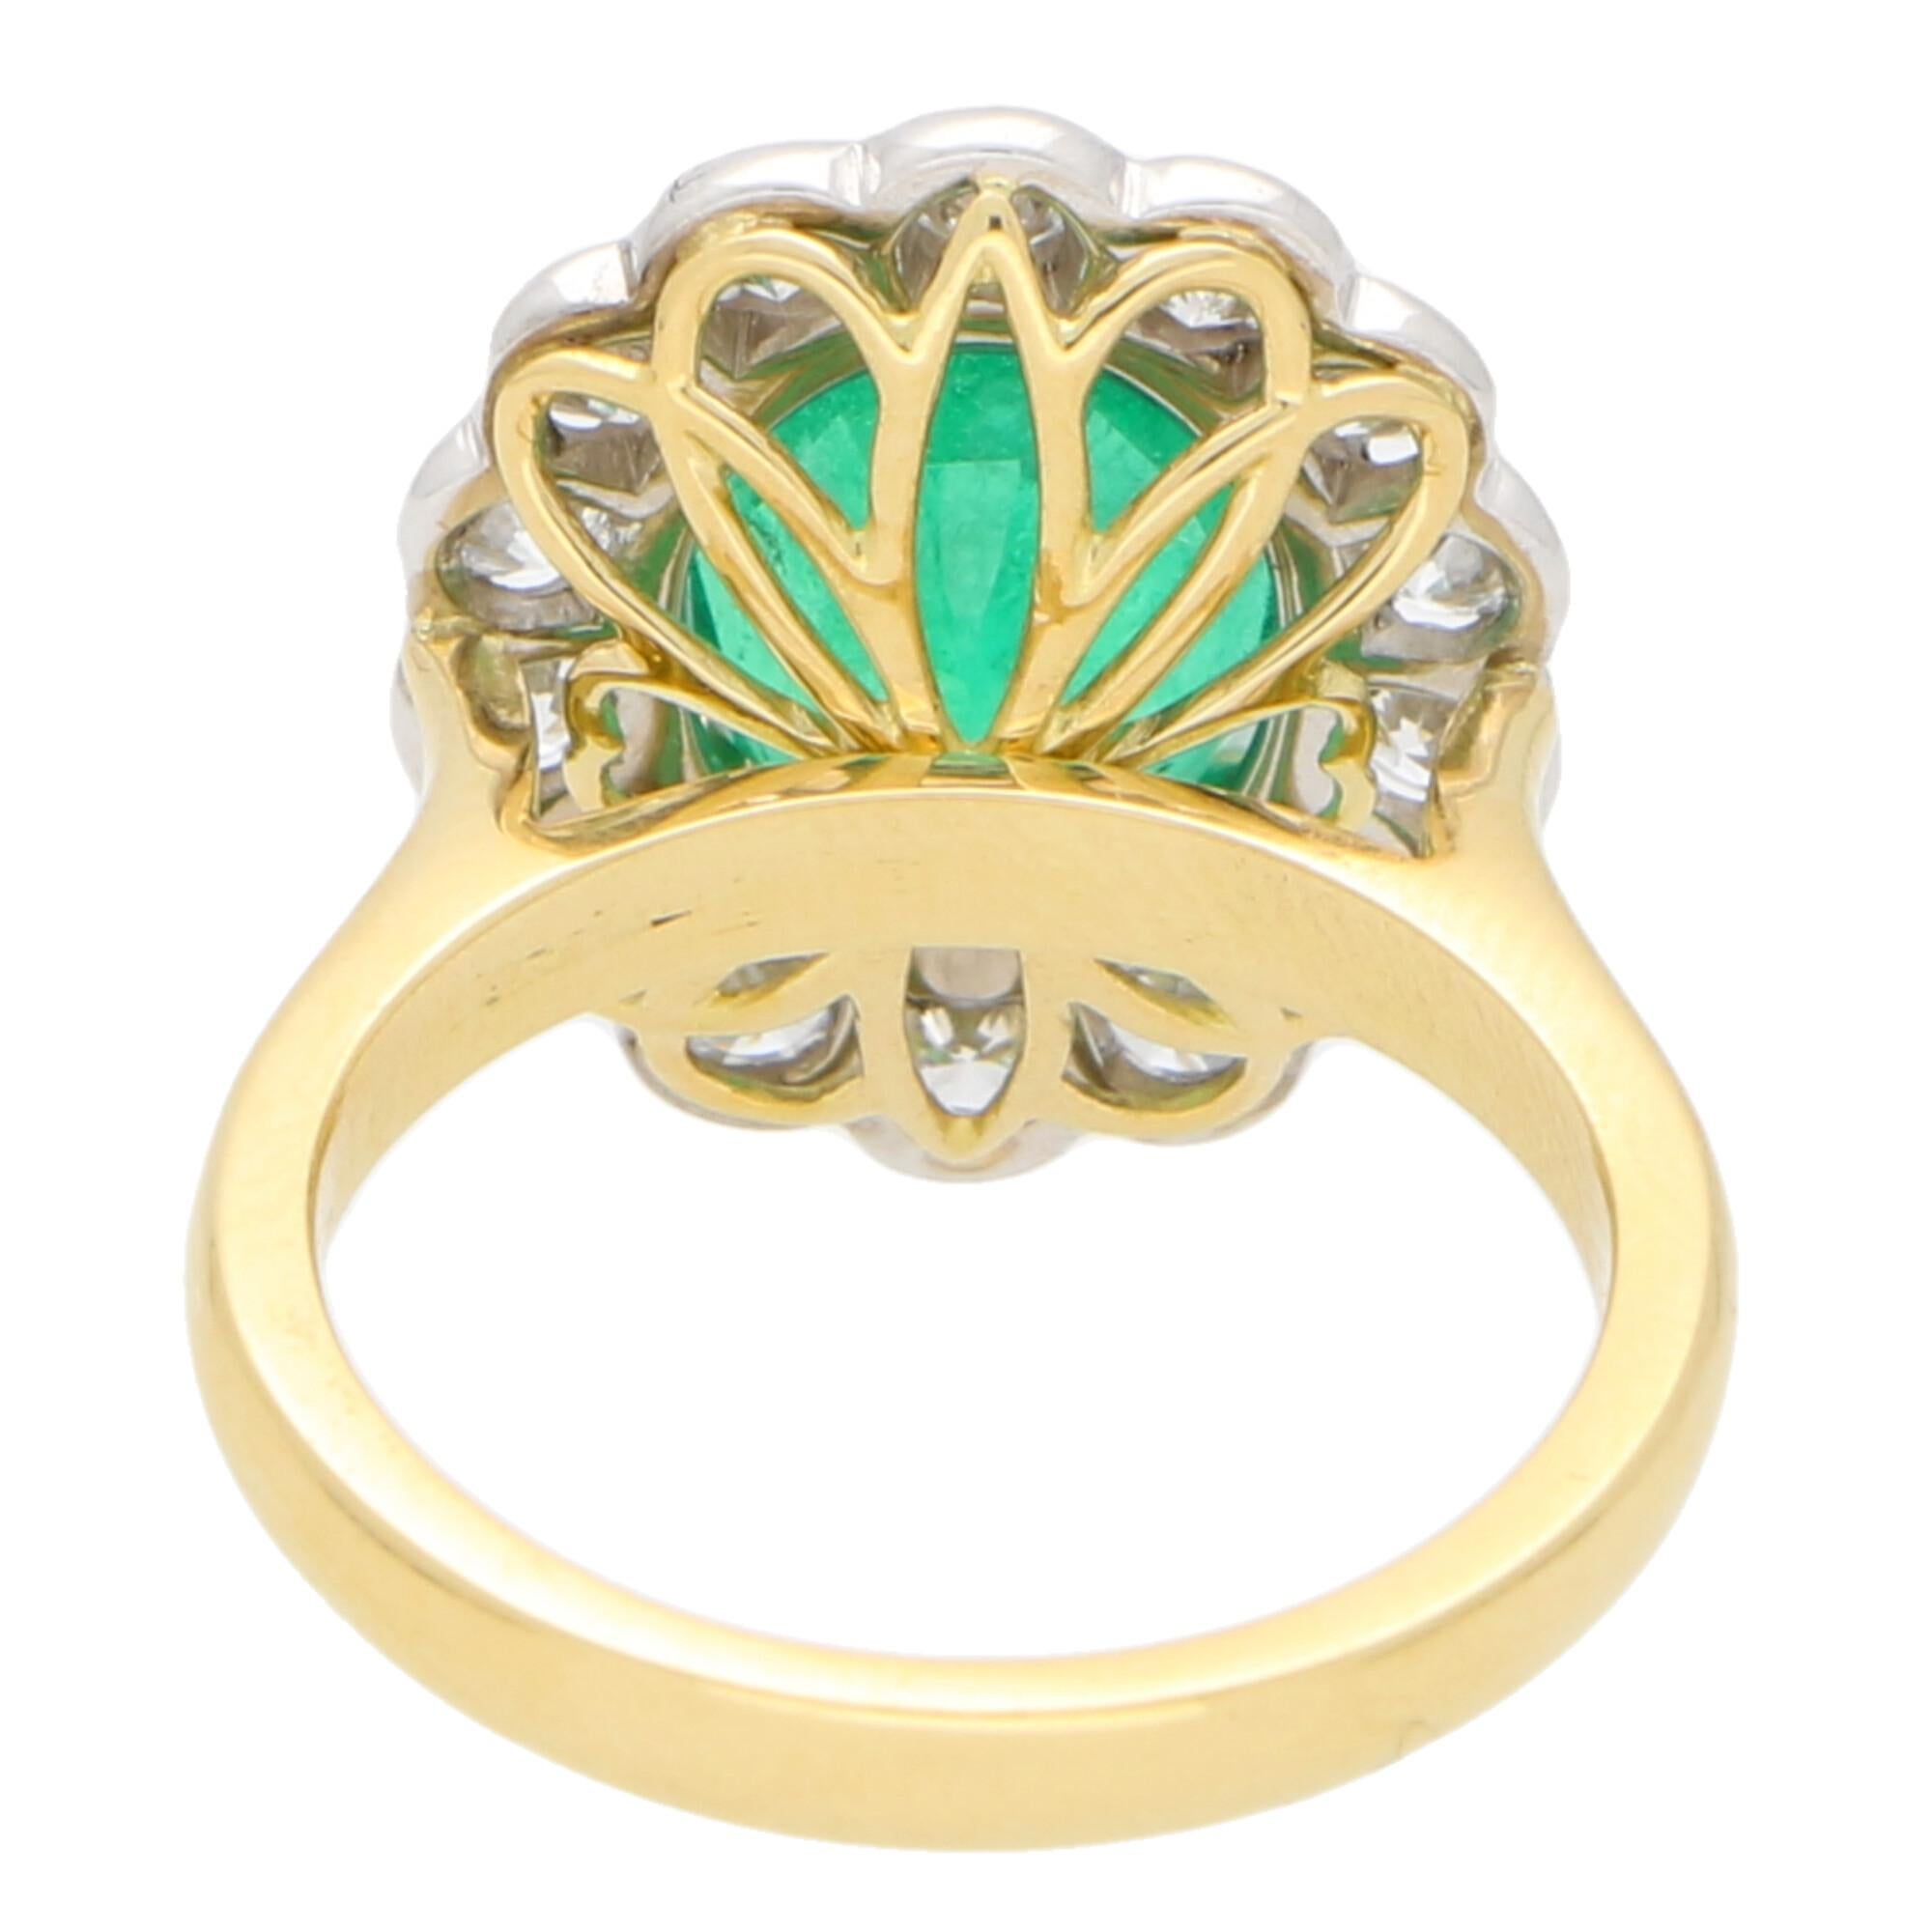 Oval Cut Emerald and Diamond Cluster Ring Set in 18 Karat Yellow and White Gold